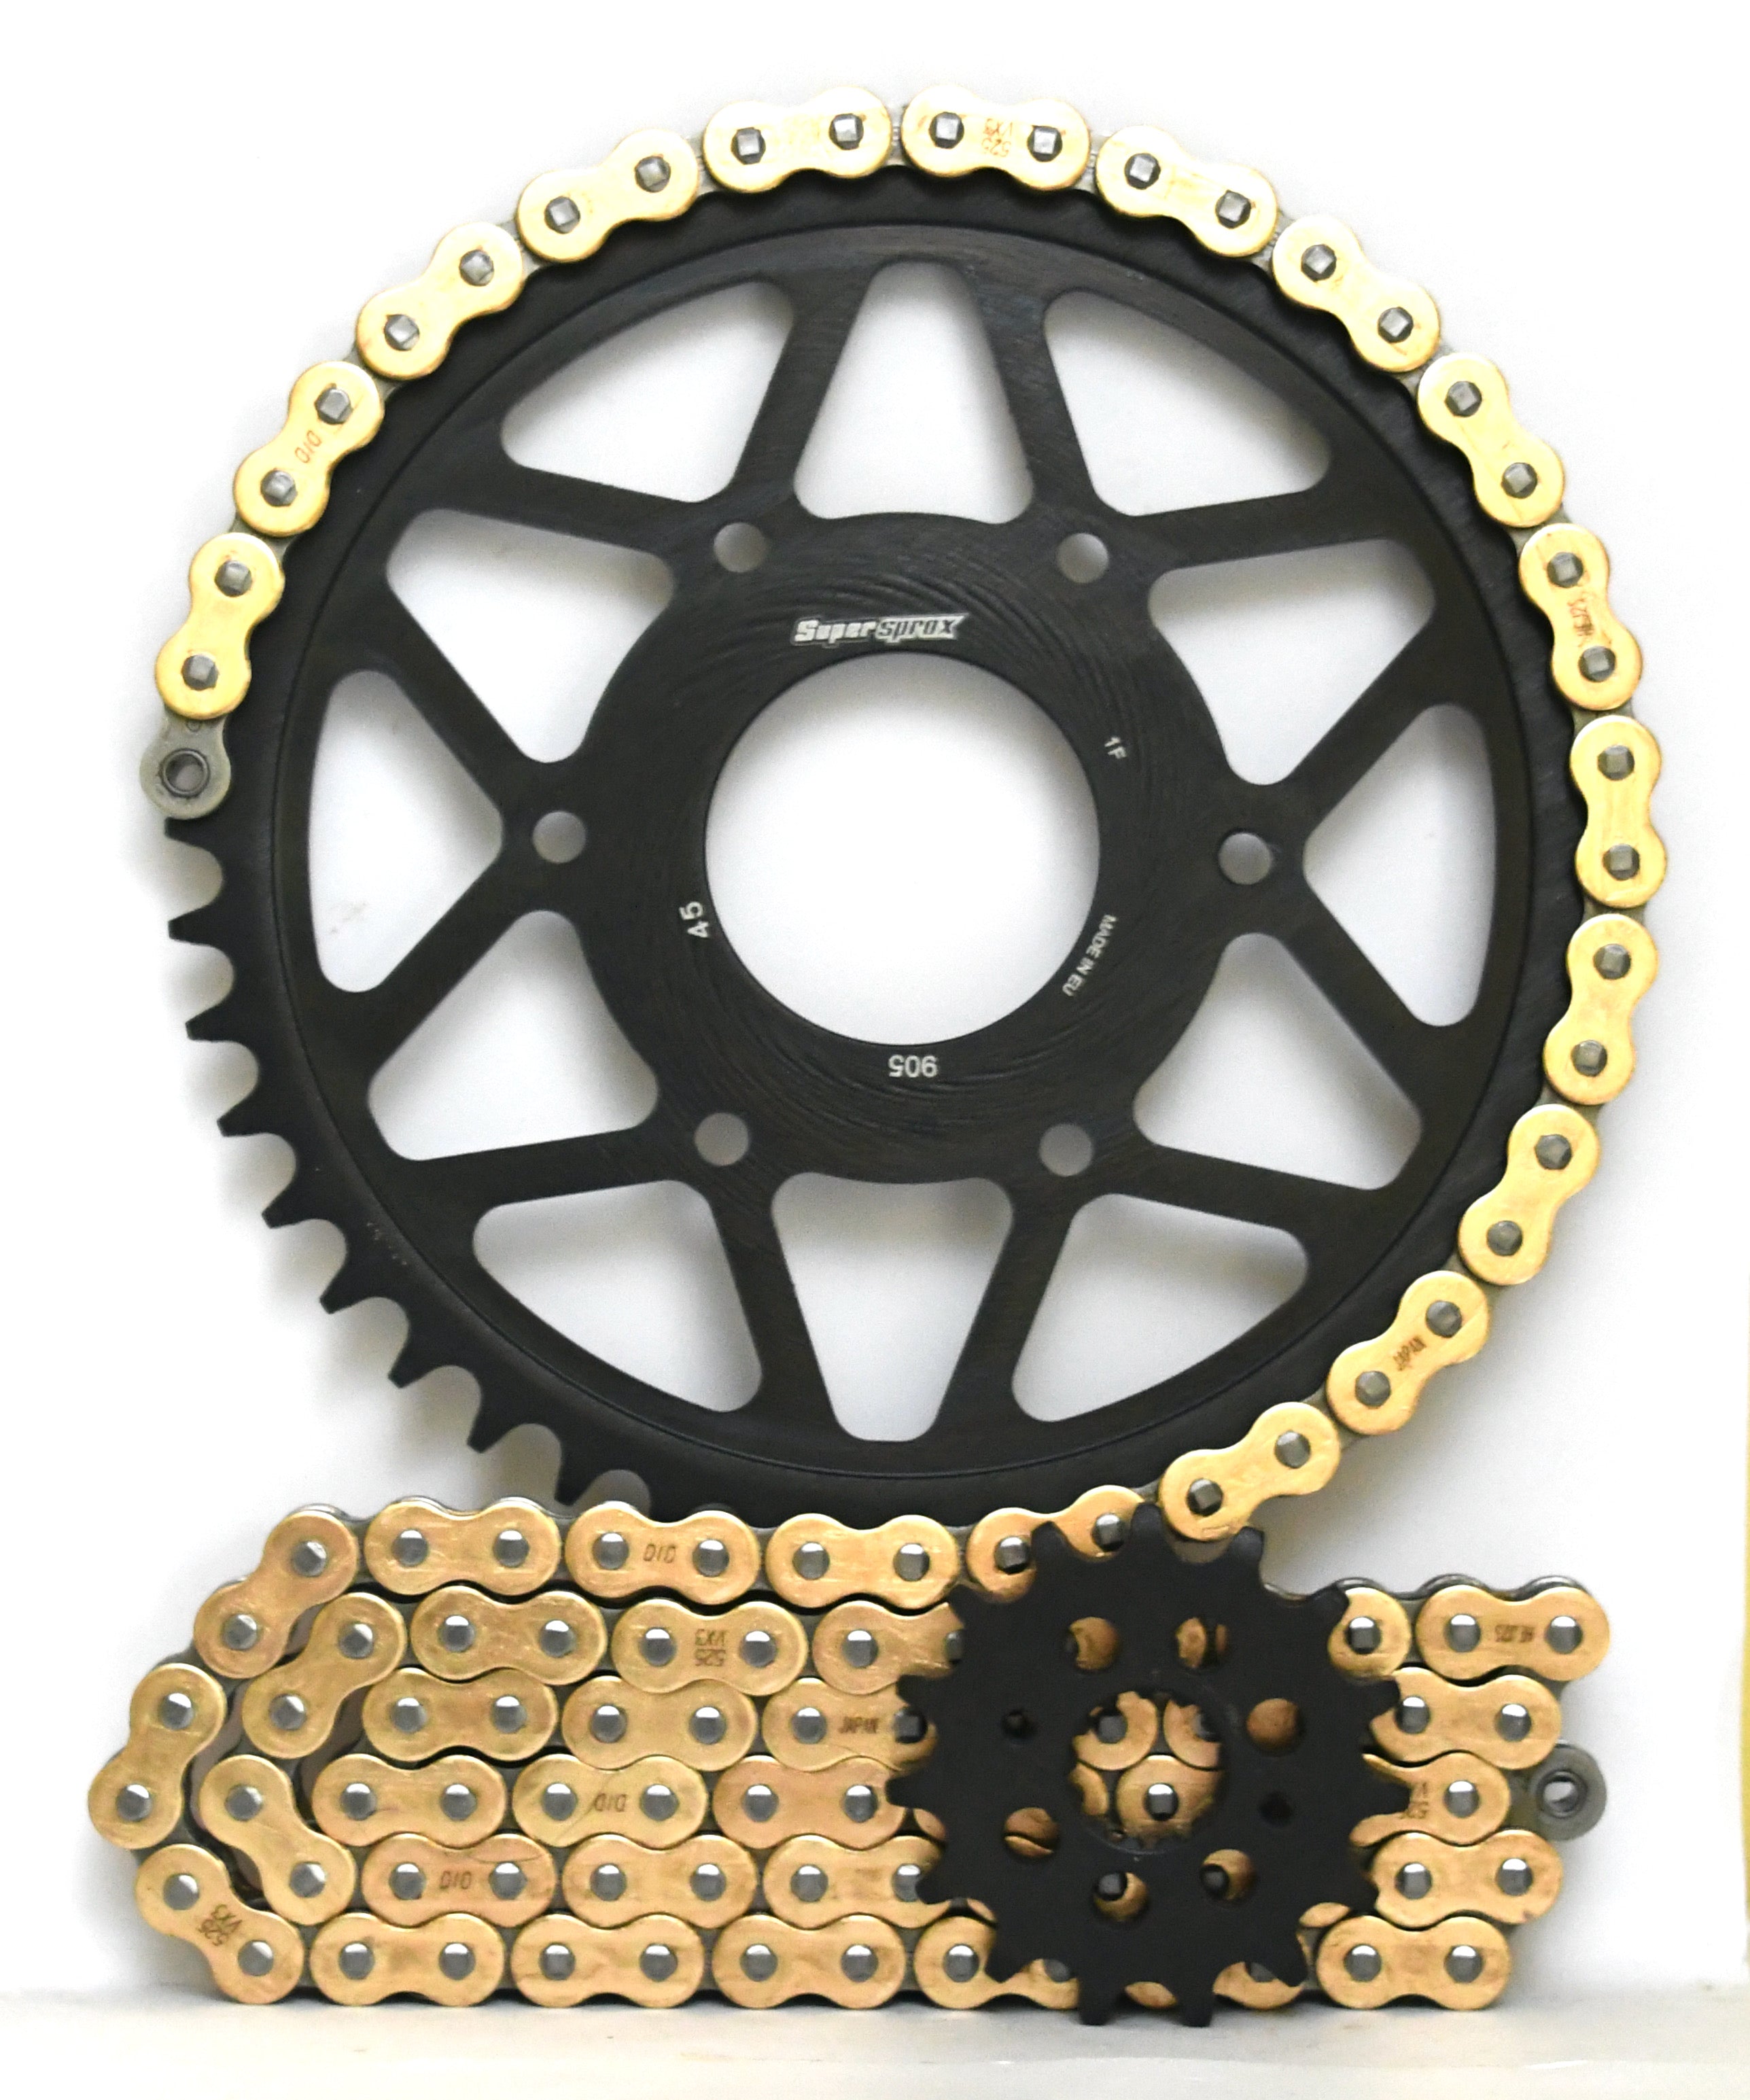 Supersprox Chain & Steel Sprocket Kit for KTM 200 RC and Duke - Standard Gearing